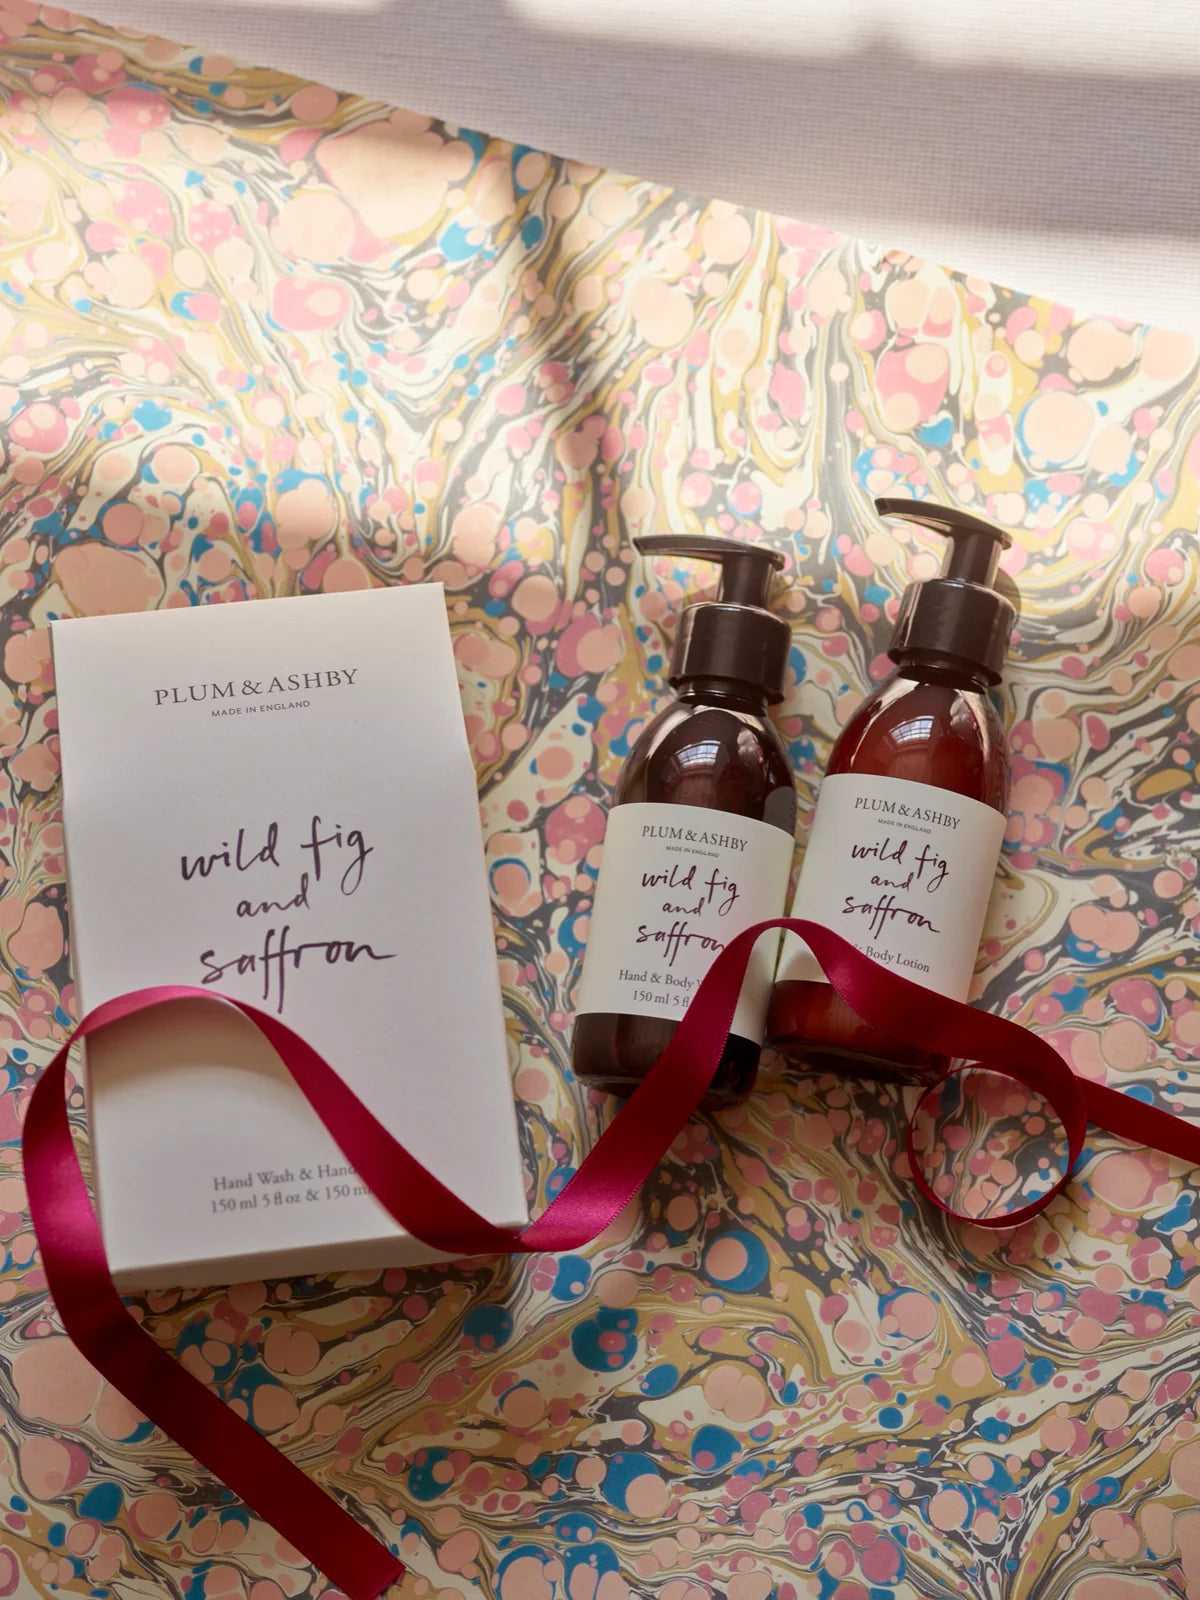 Plum & Ashby Wash and Lotion Duo | Wild Fig & Saffron Wash & Lotion Duo Plum & Ashby 